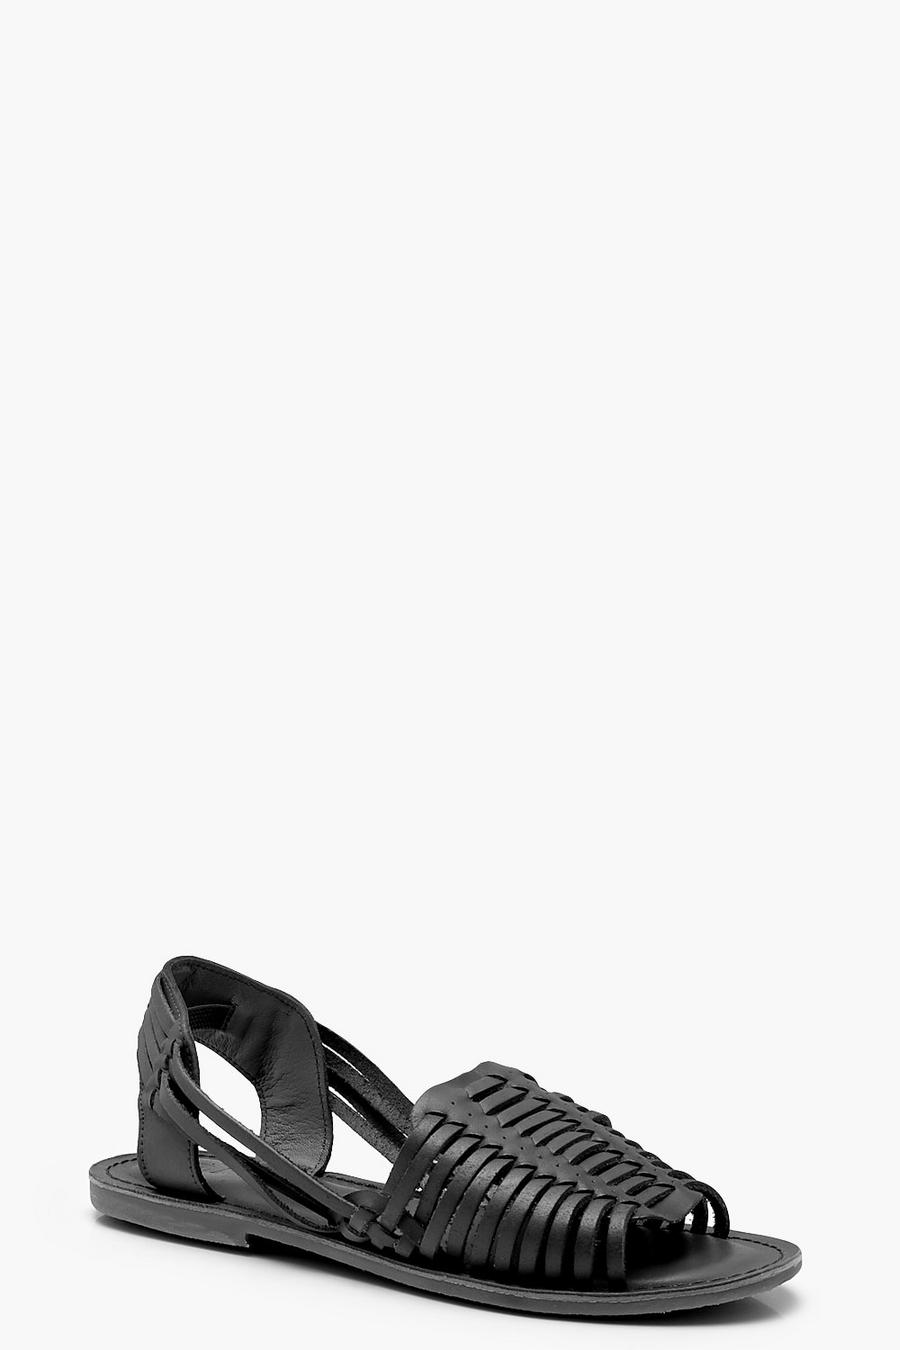 Black Leather Woven Sandals image number 1